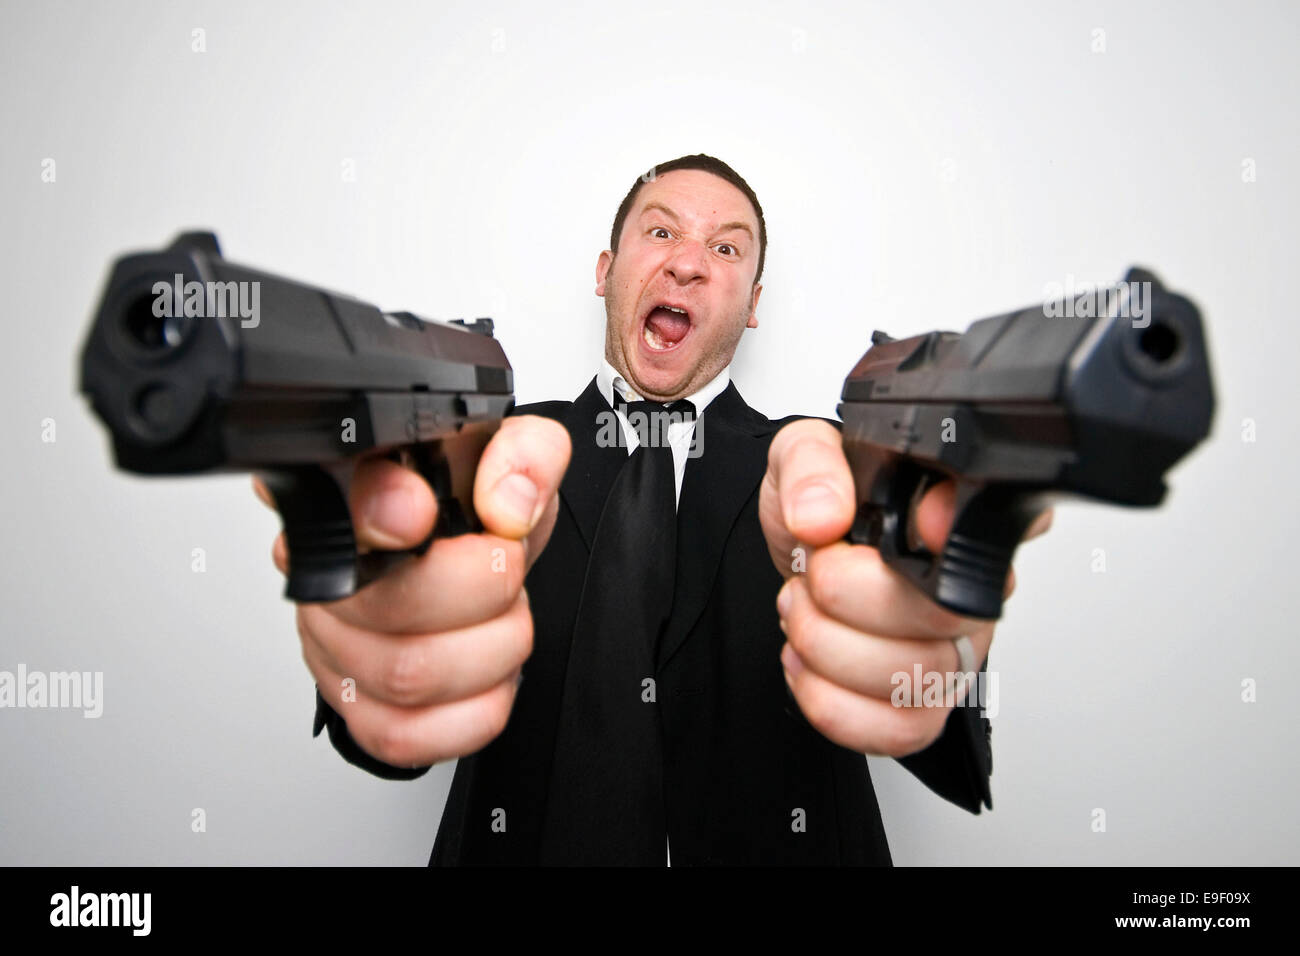 a-man-with-two-guns-dressed-in-a-black-suit-and-tie-shoots-guns-at-E9F09X.jpg